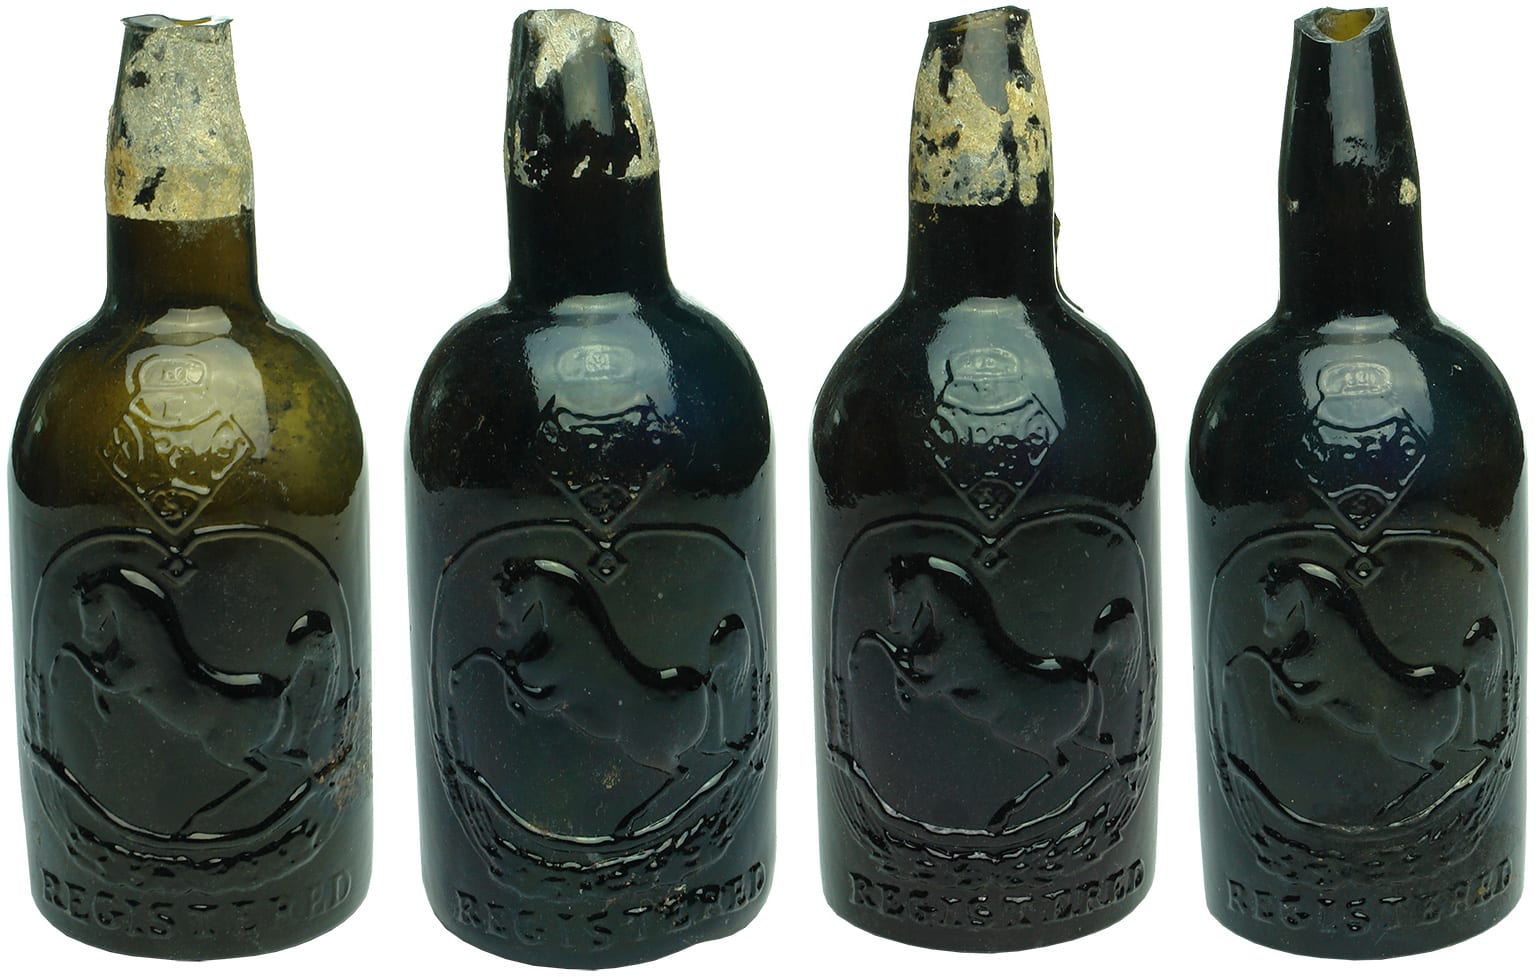 Tooth Black Horse Stout Glass Bottles